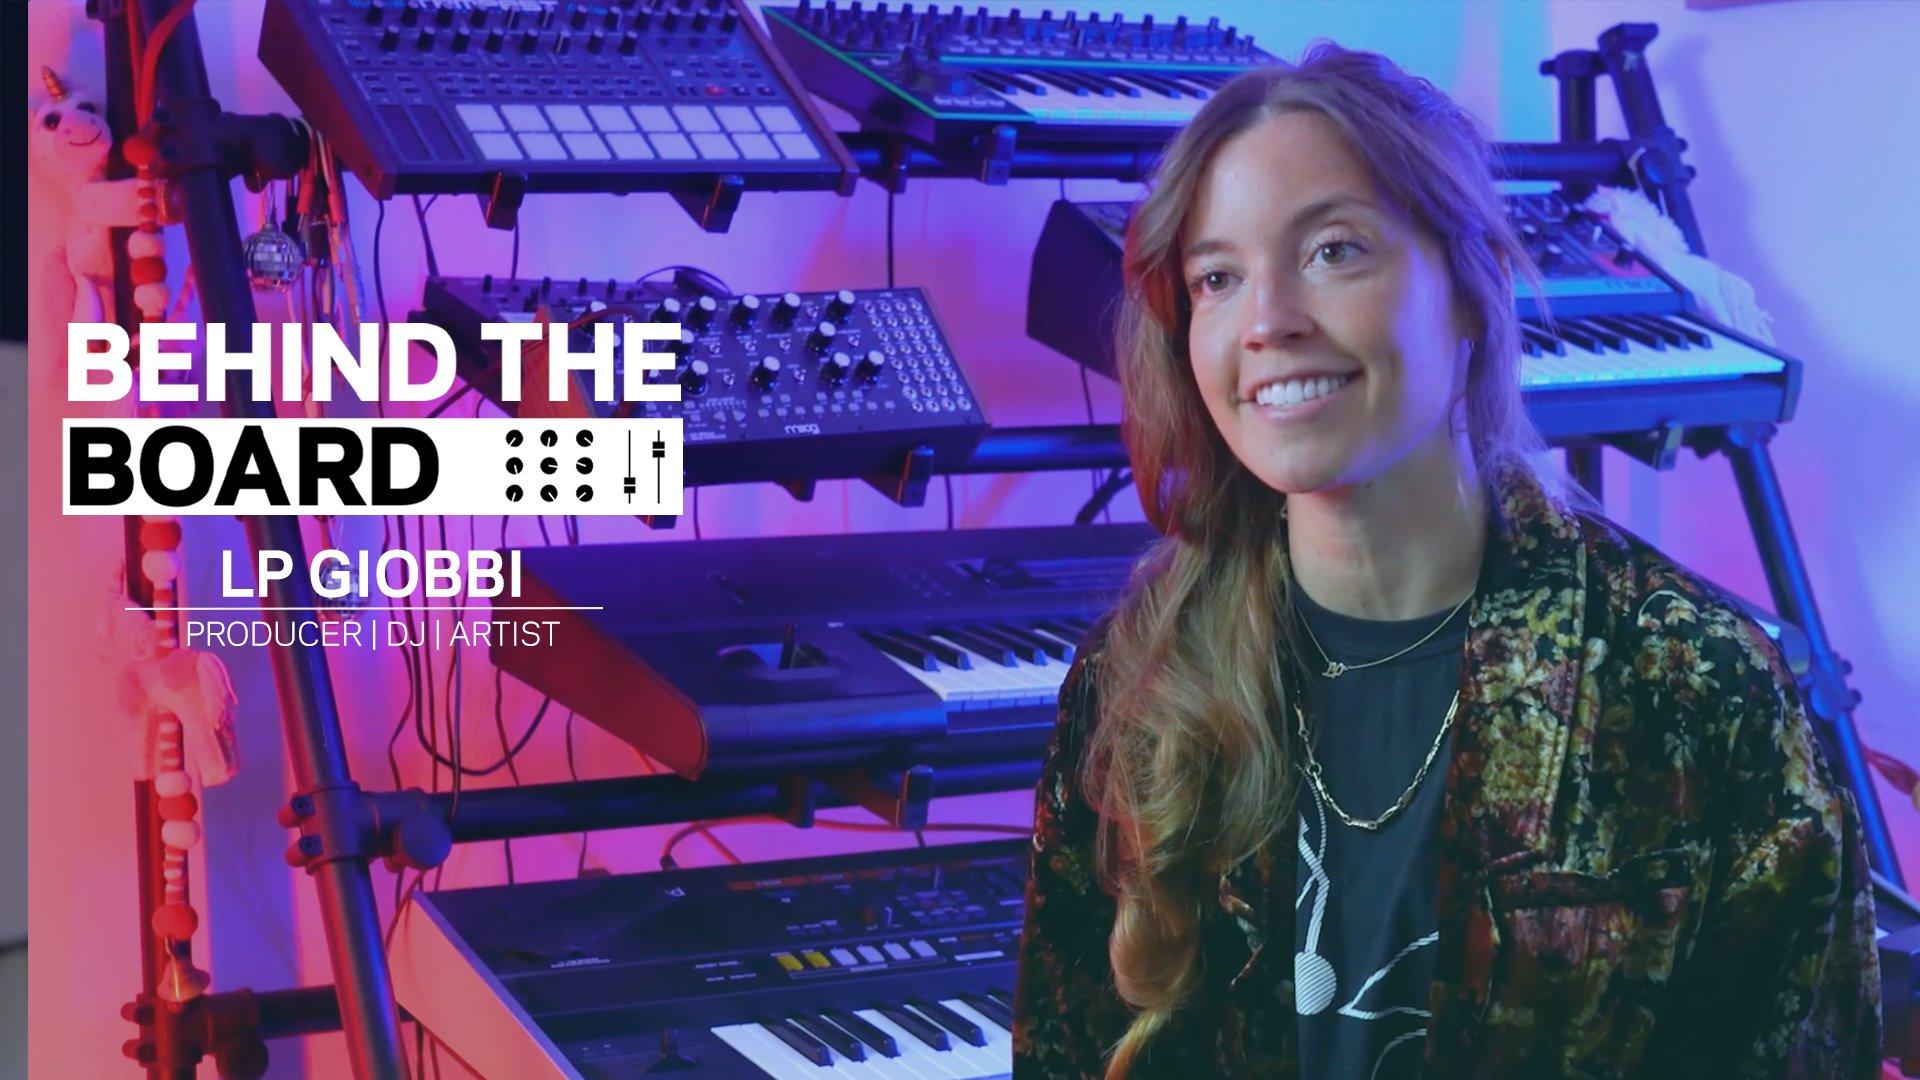 Watch LP Giobbi Explain Her Approach To Producing